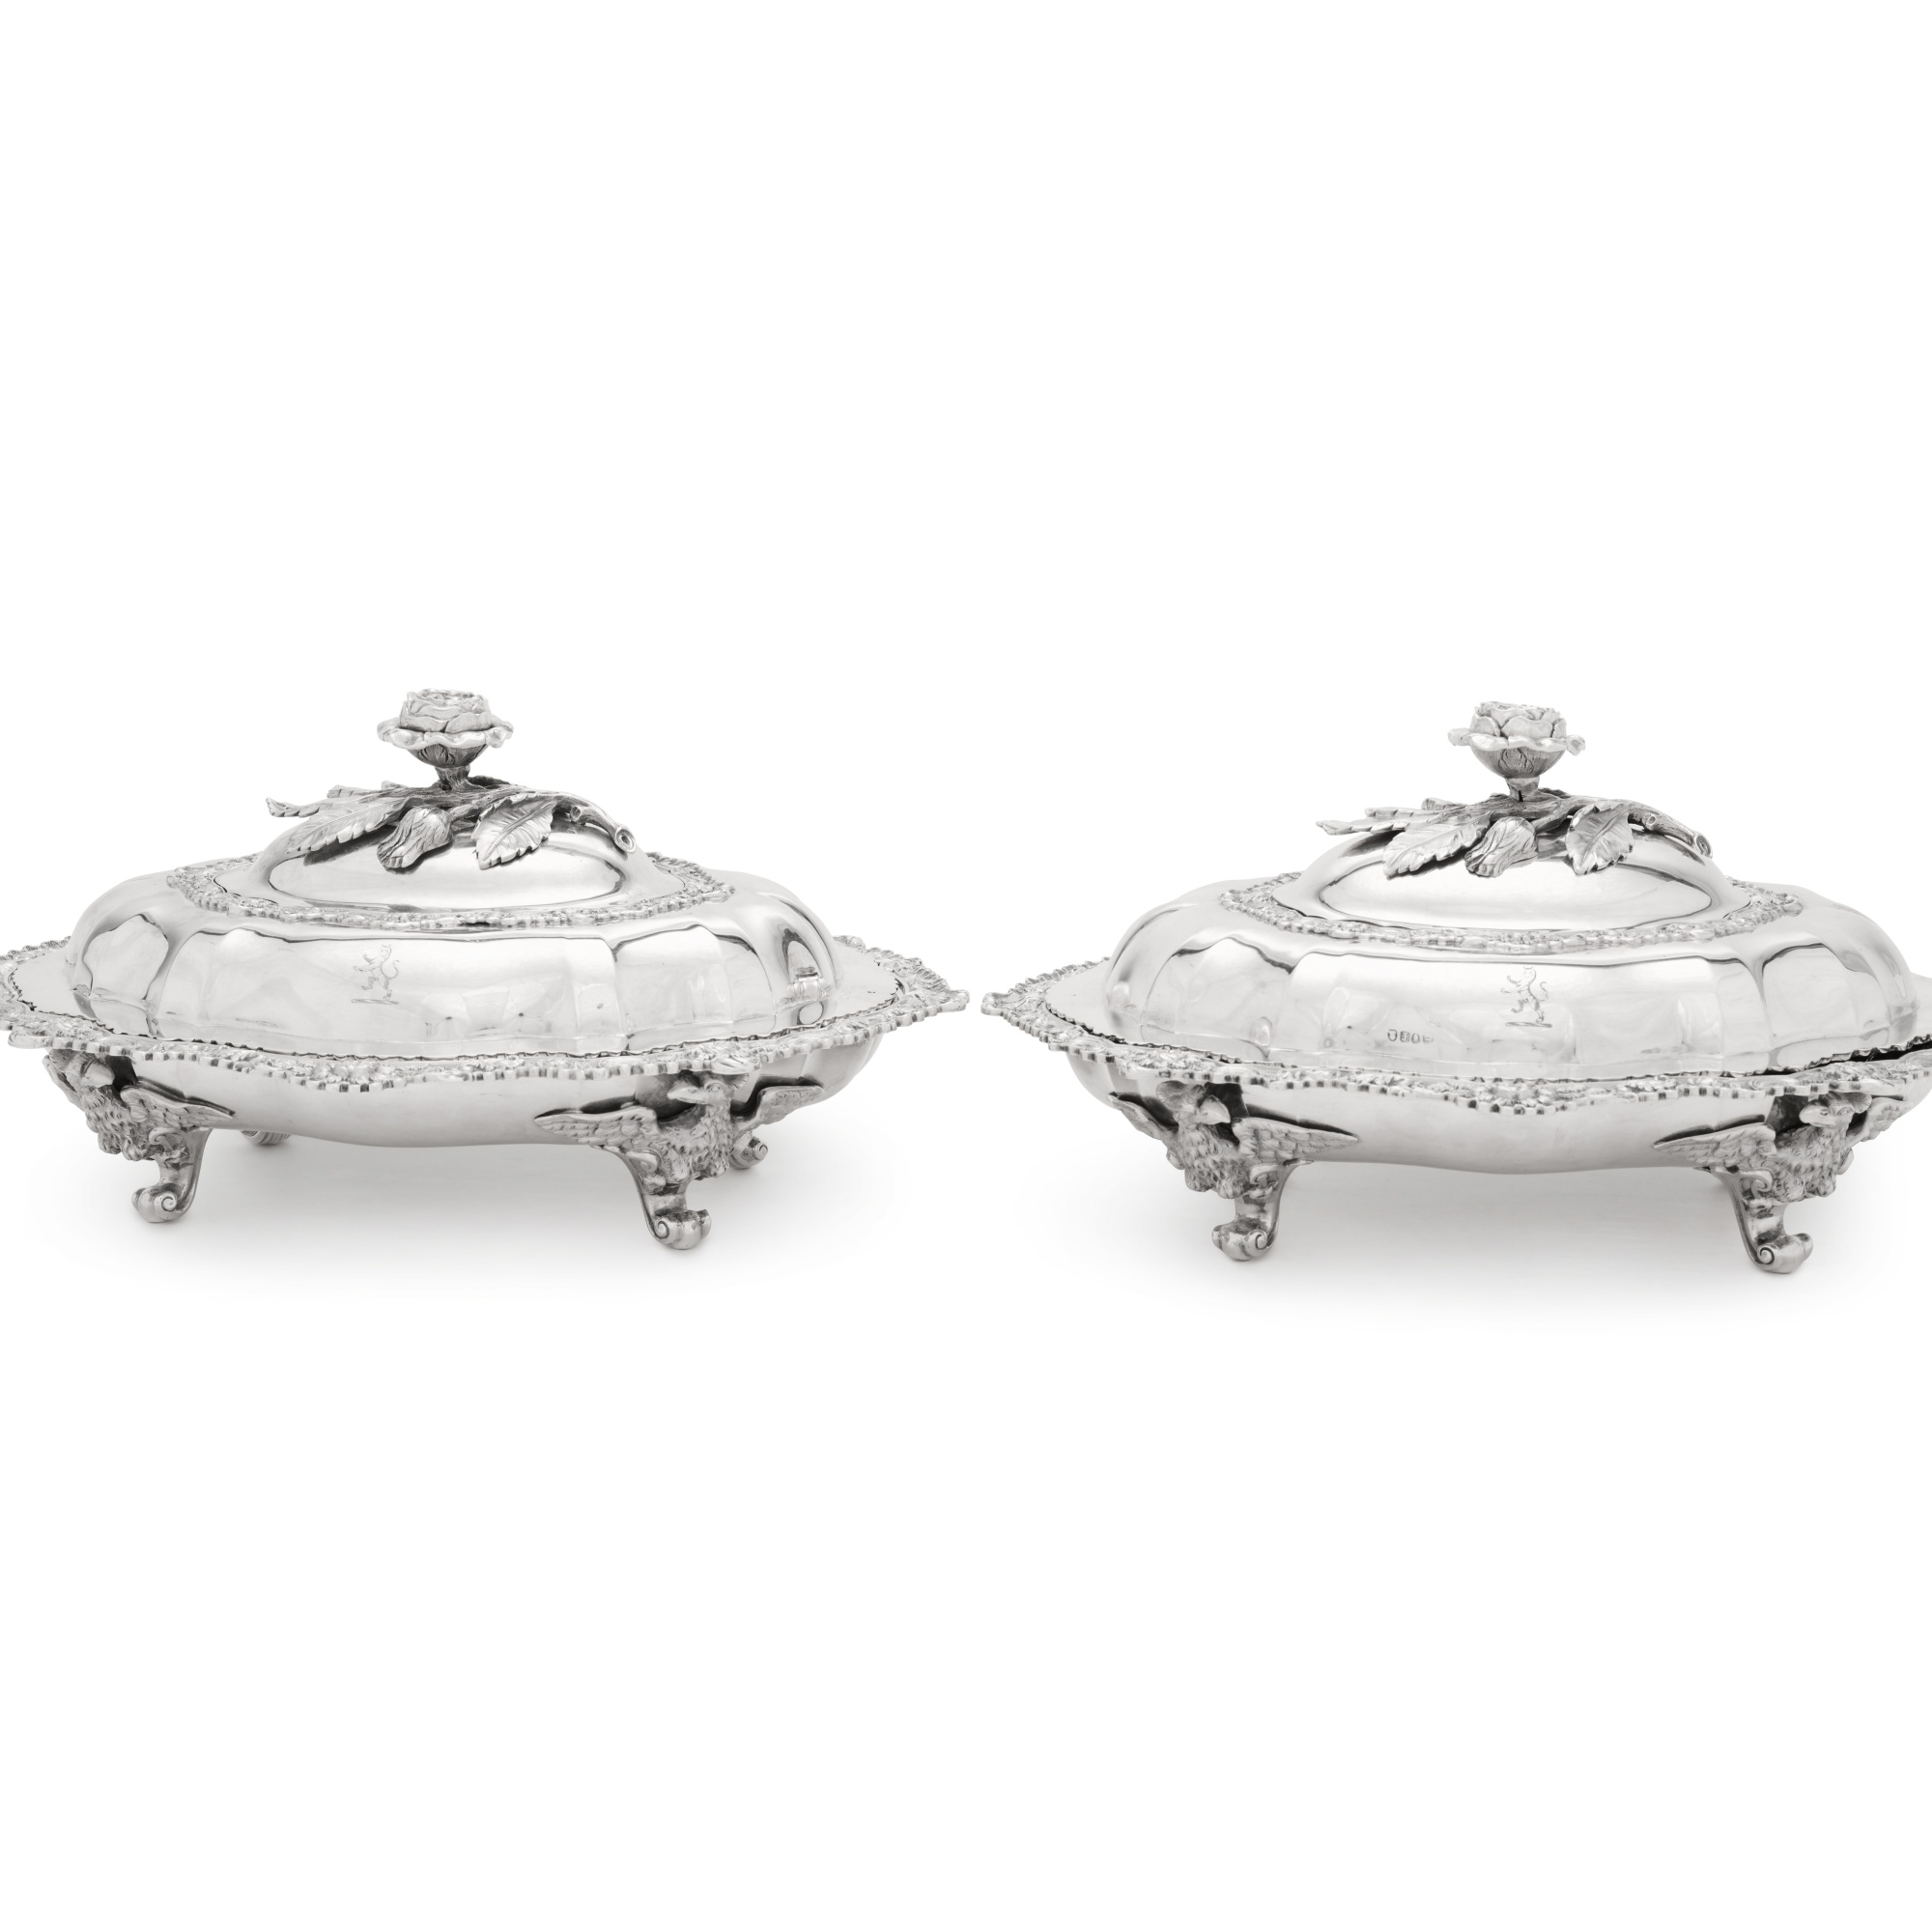 A pair of George IV silver entrée dishes, Thomas Burwash, London, 1821 - Image 3 of 5